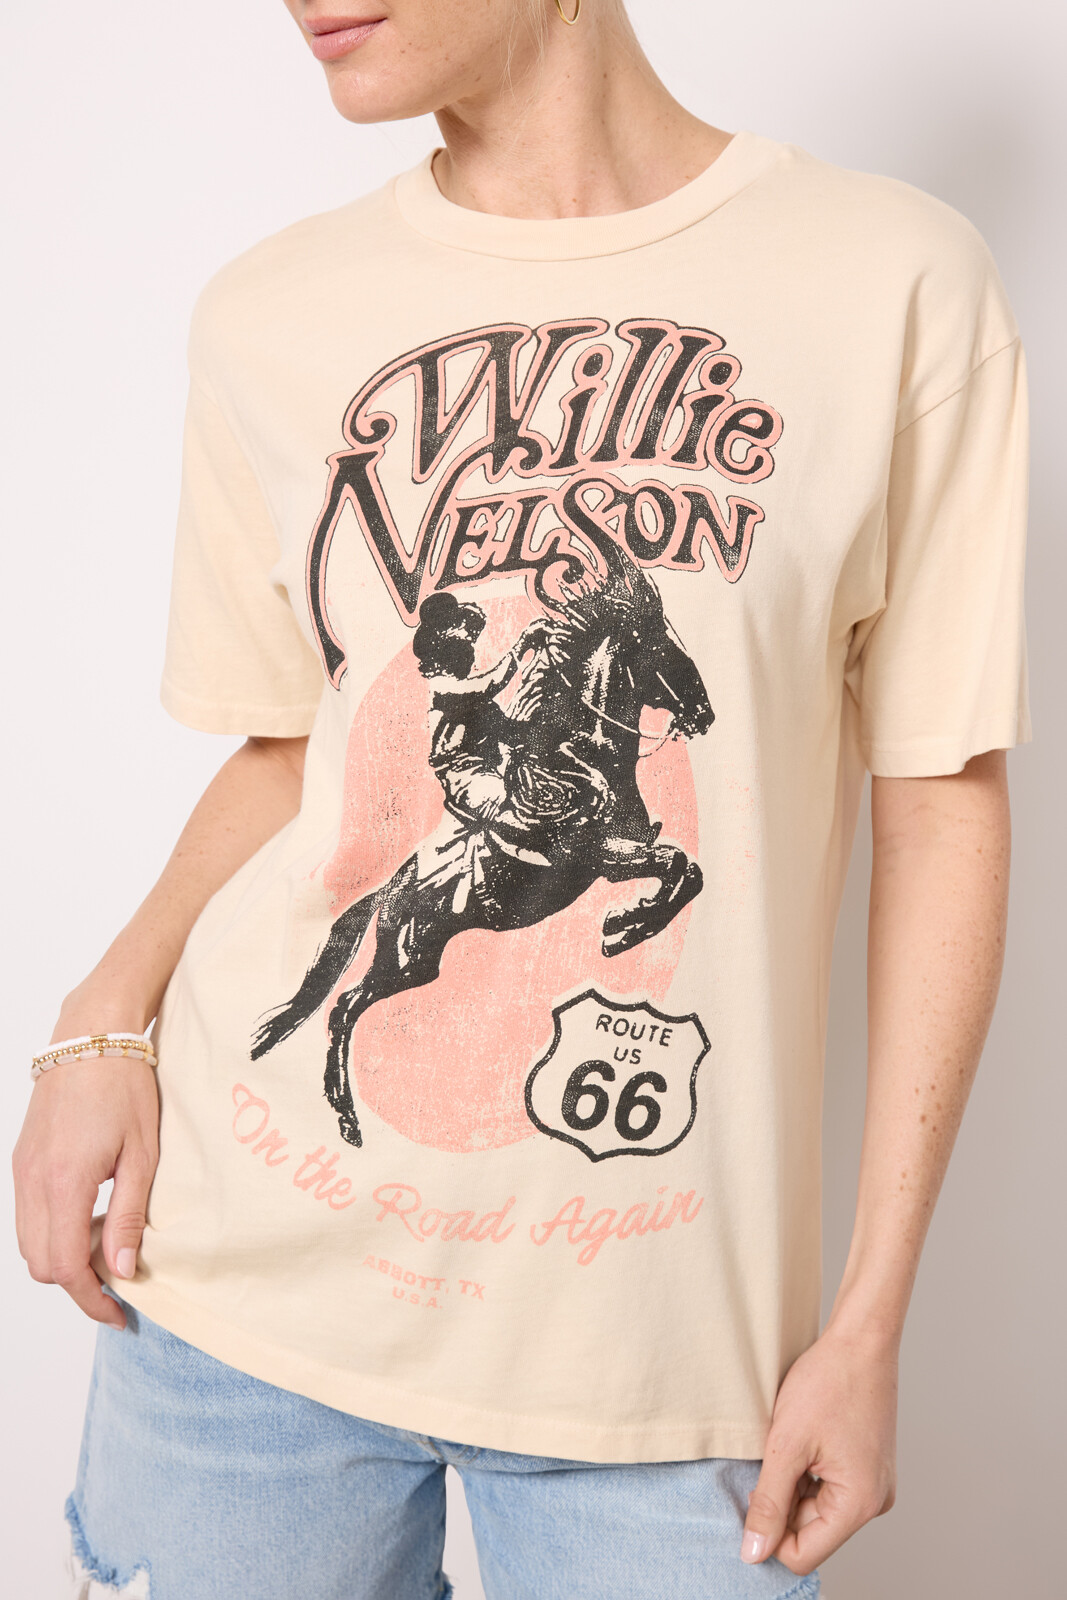 Willie Nelson Route 66 Tour Tee